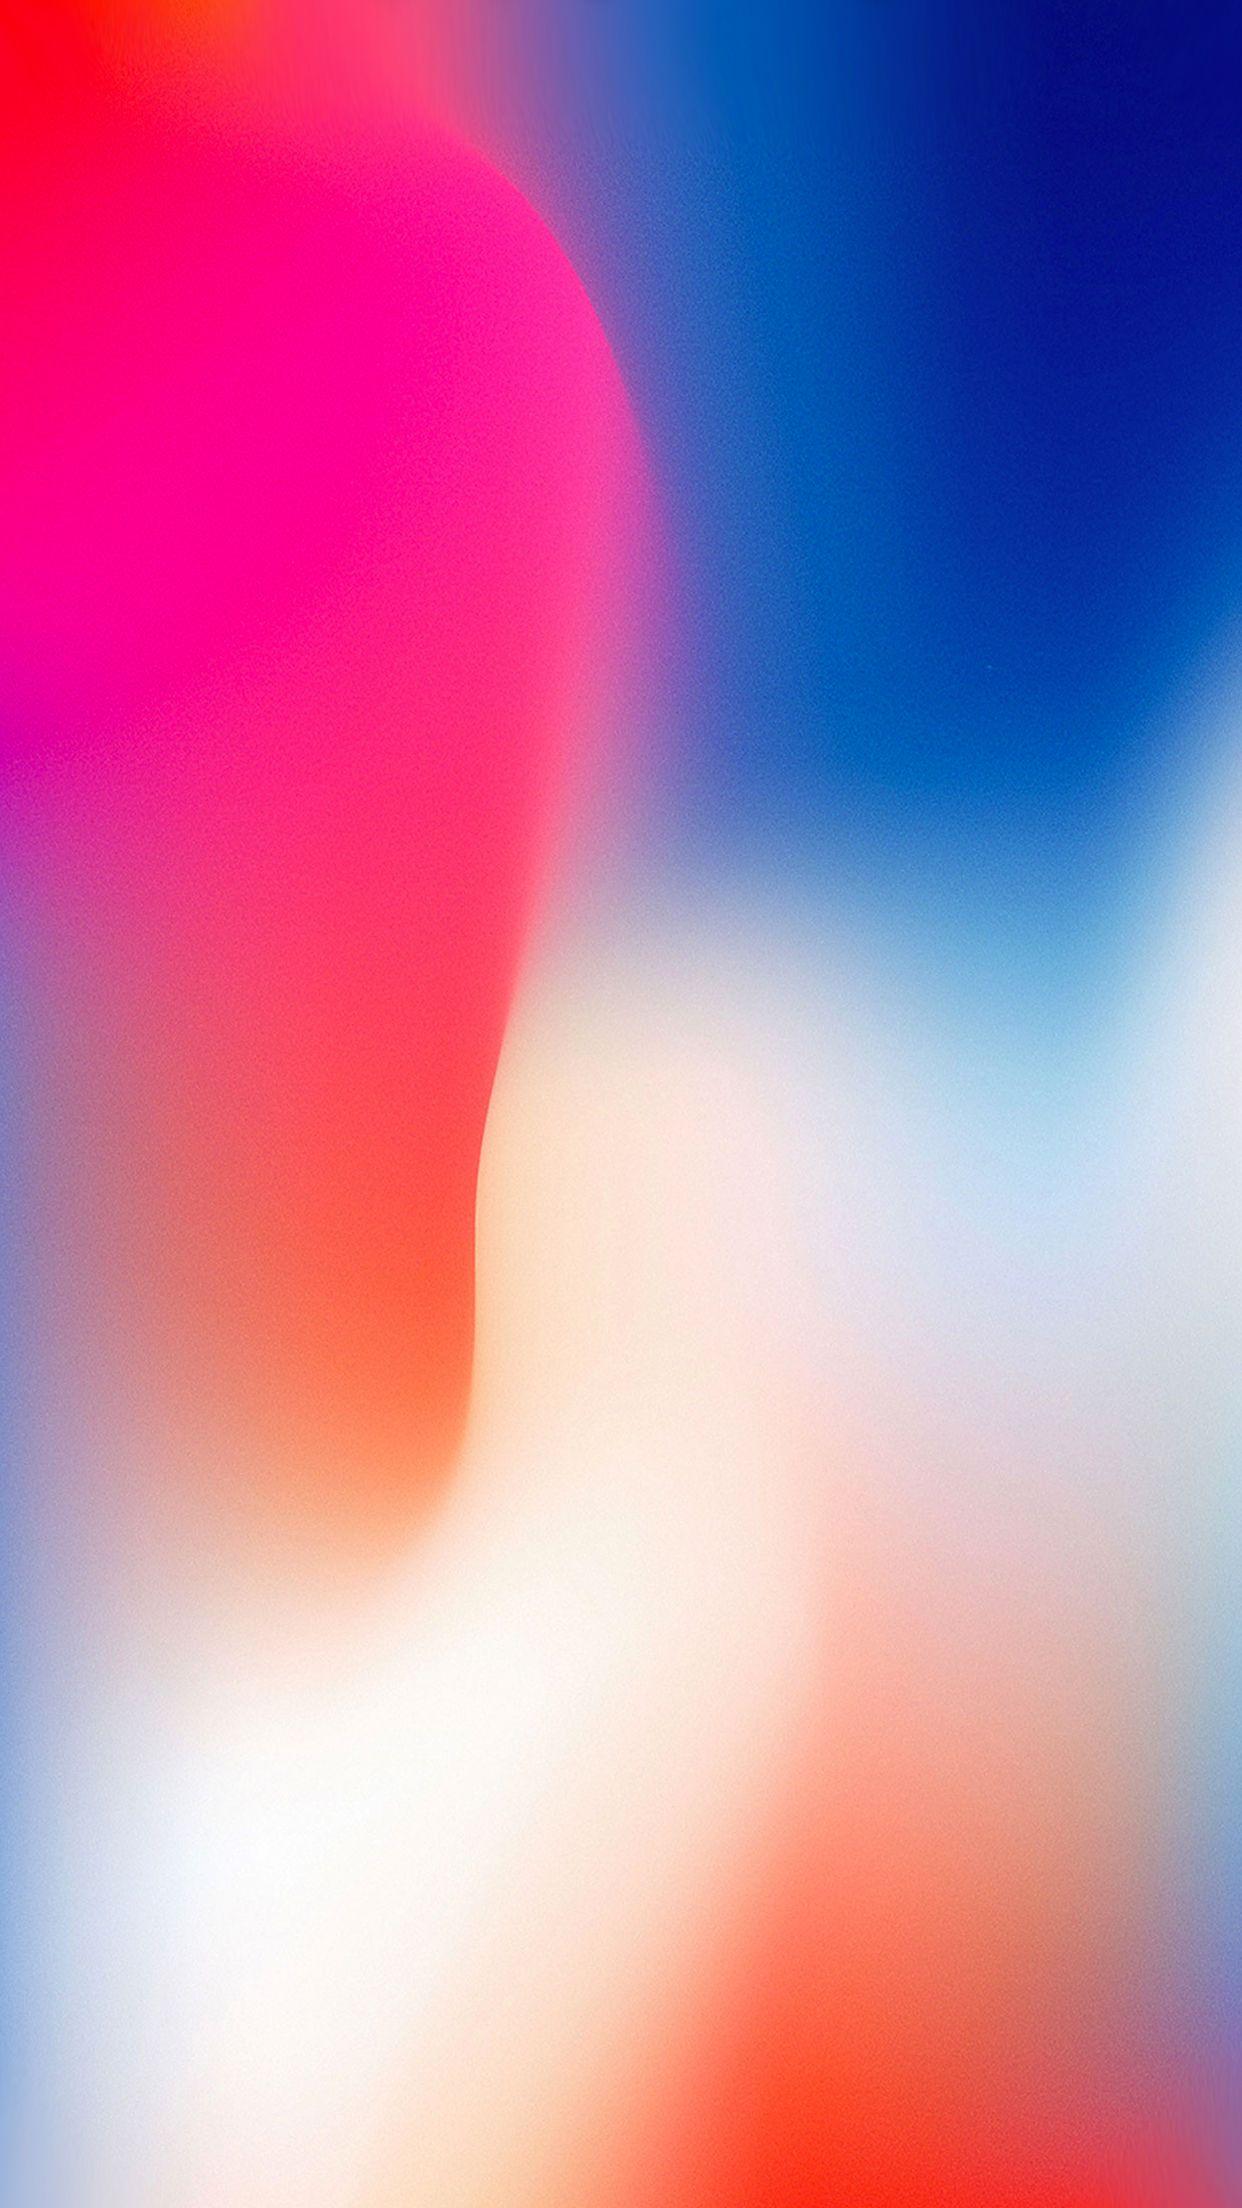 iPhone X Wallpaper Free iPhone X Background